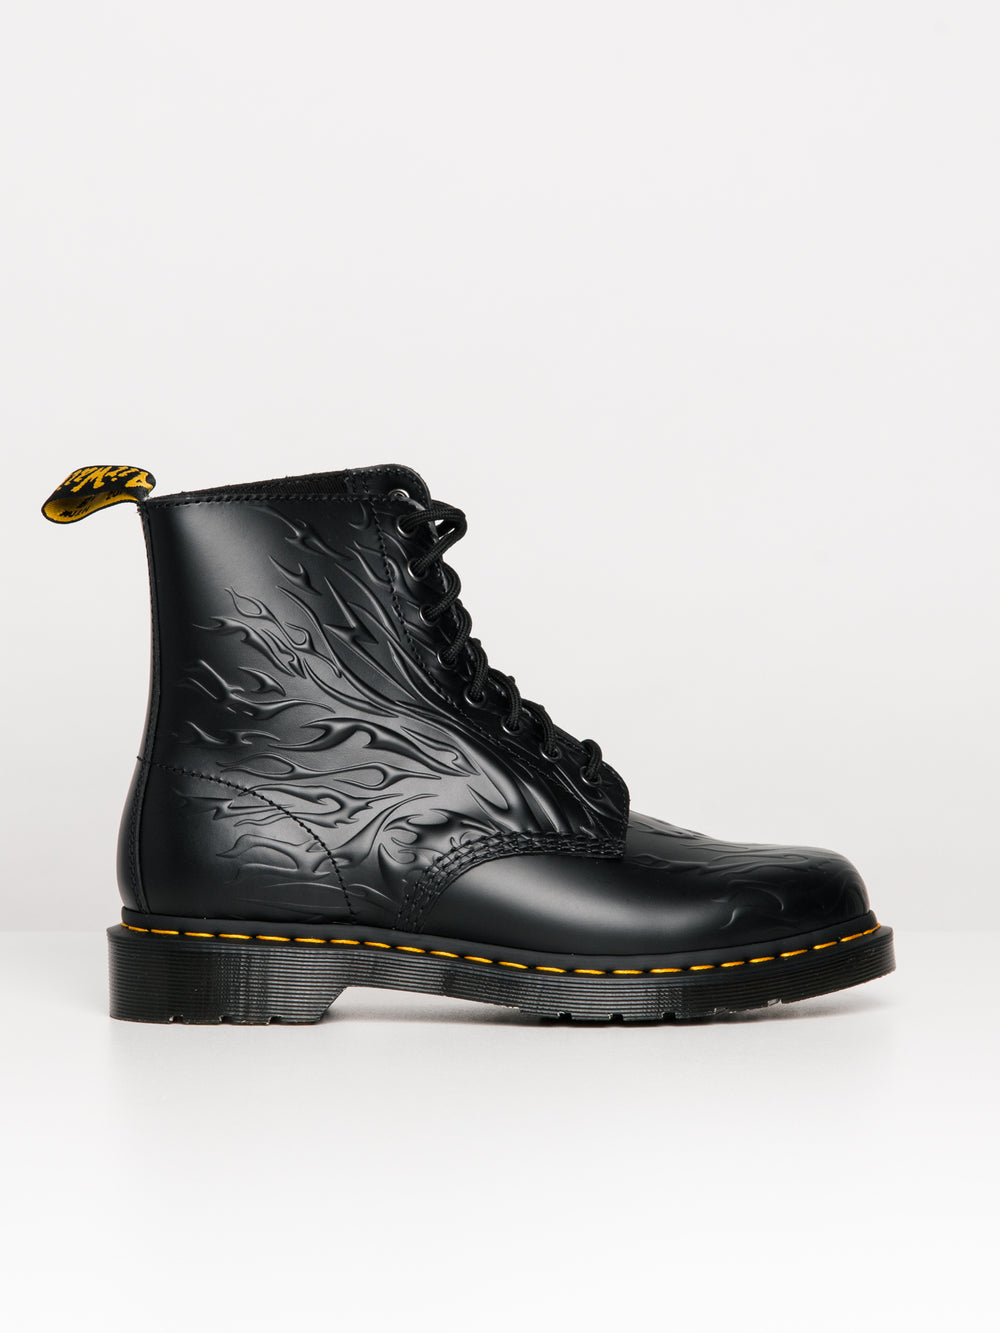 DR MARTENS 1460 FLAMES SMOOTH BLACK BOOT - CLEARANCE